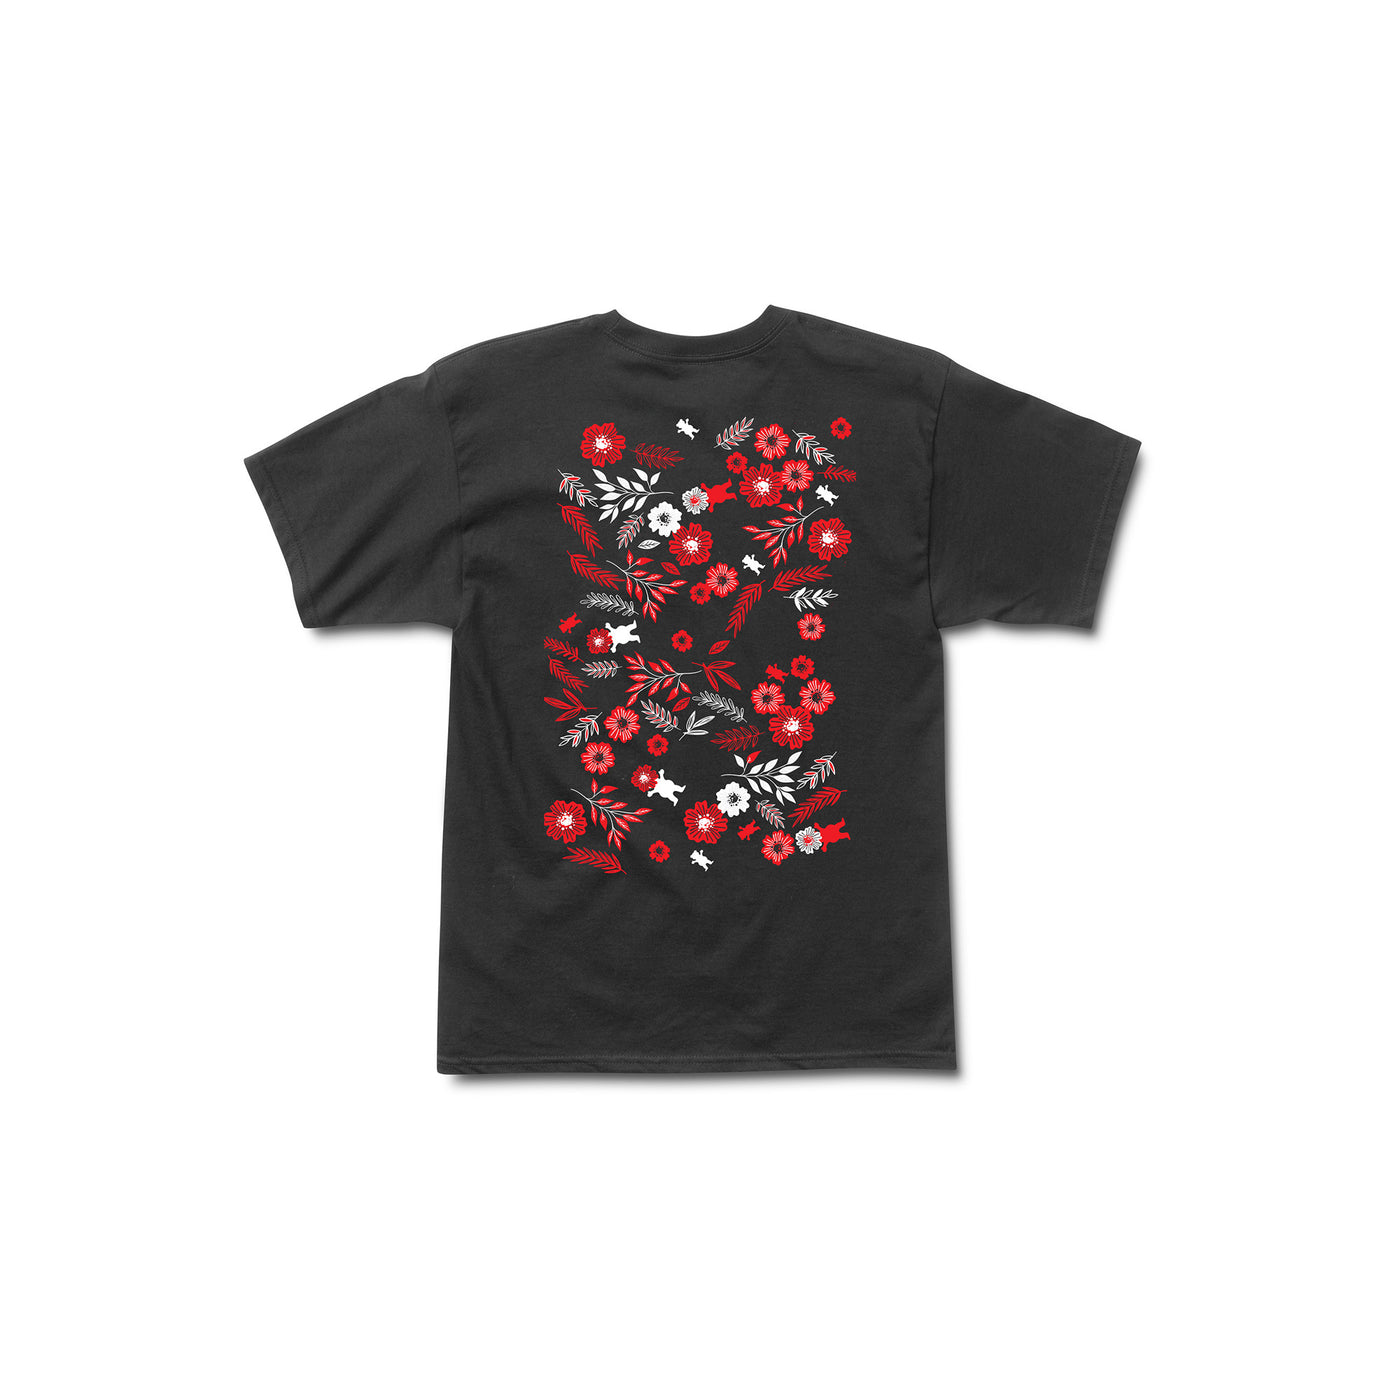 Smell The Flowers SS Tee - Black